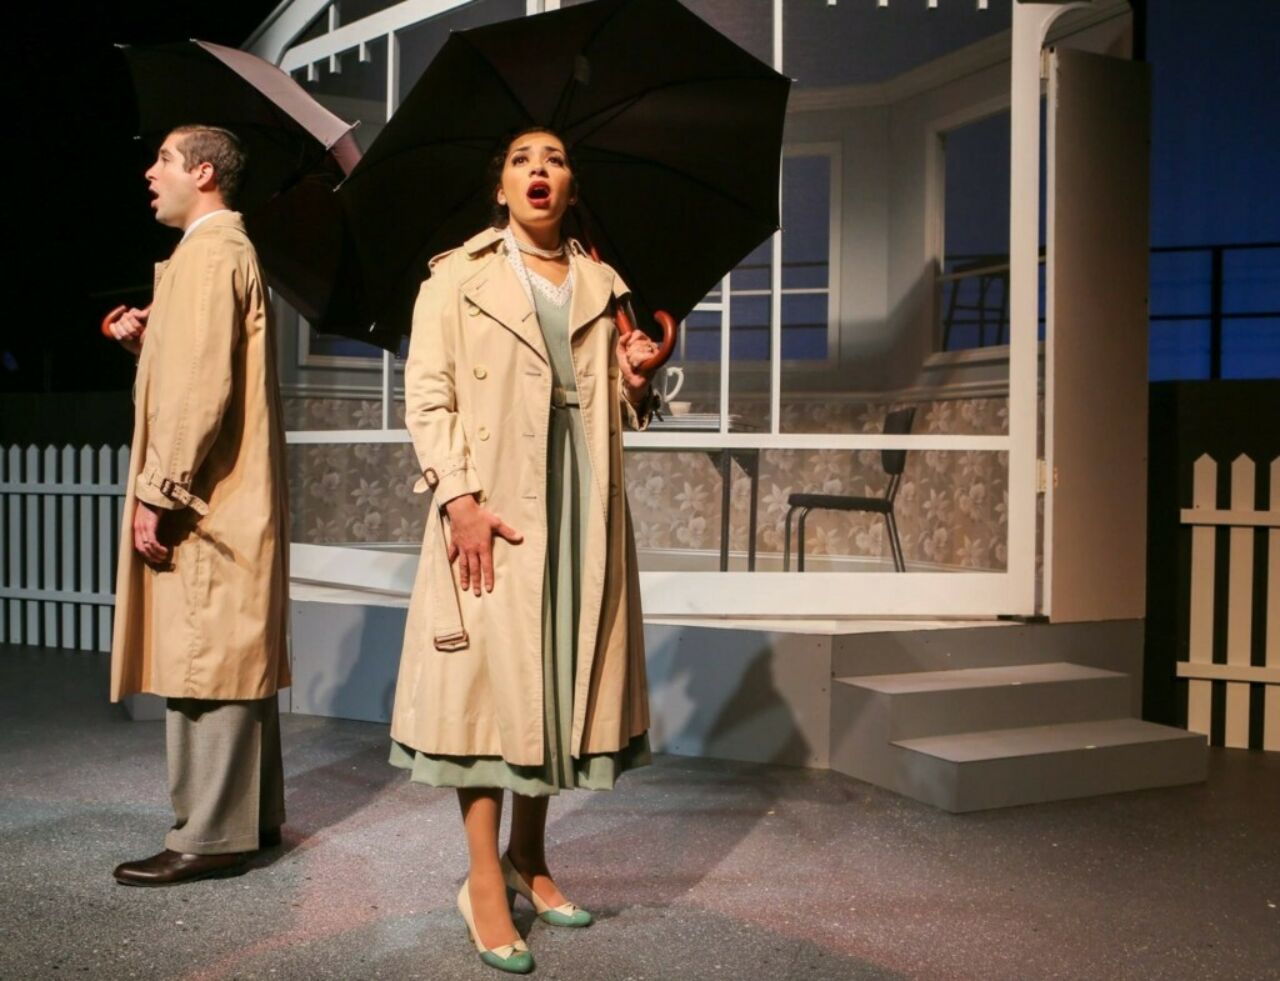 Two actors perform in Penn State Opera Theatre's production of "Trouble in Tahiti"